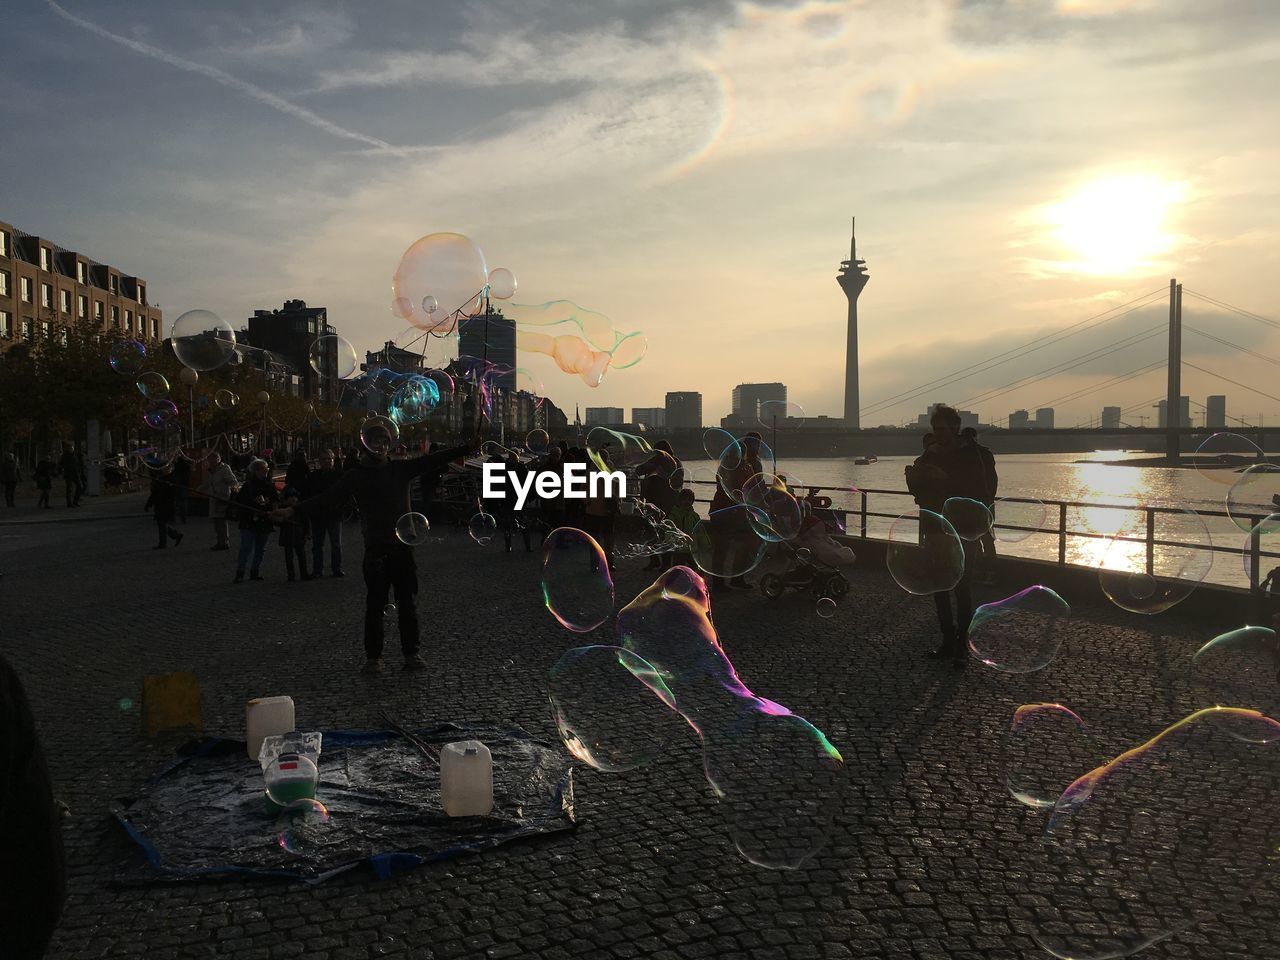 People enjoying bubbles on street with rheinturm in background during sunset